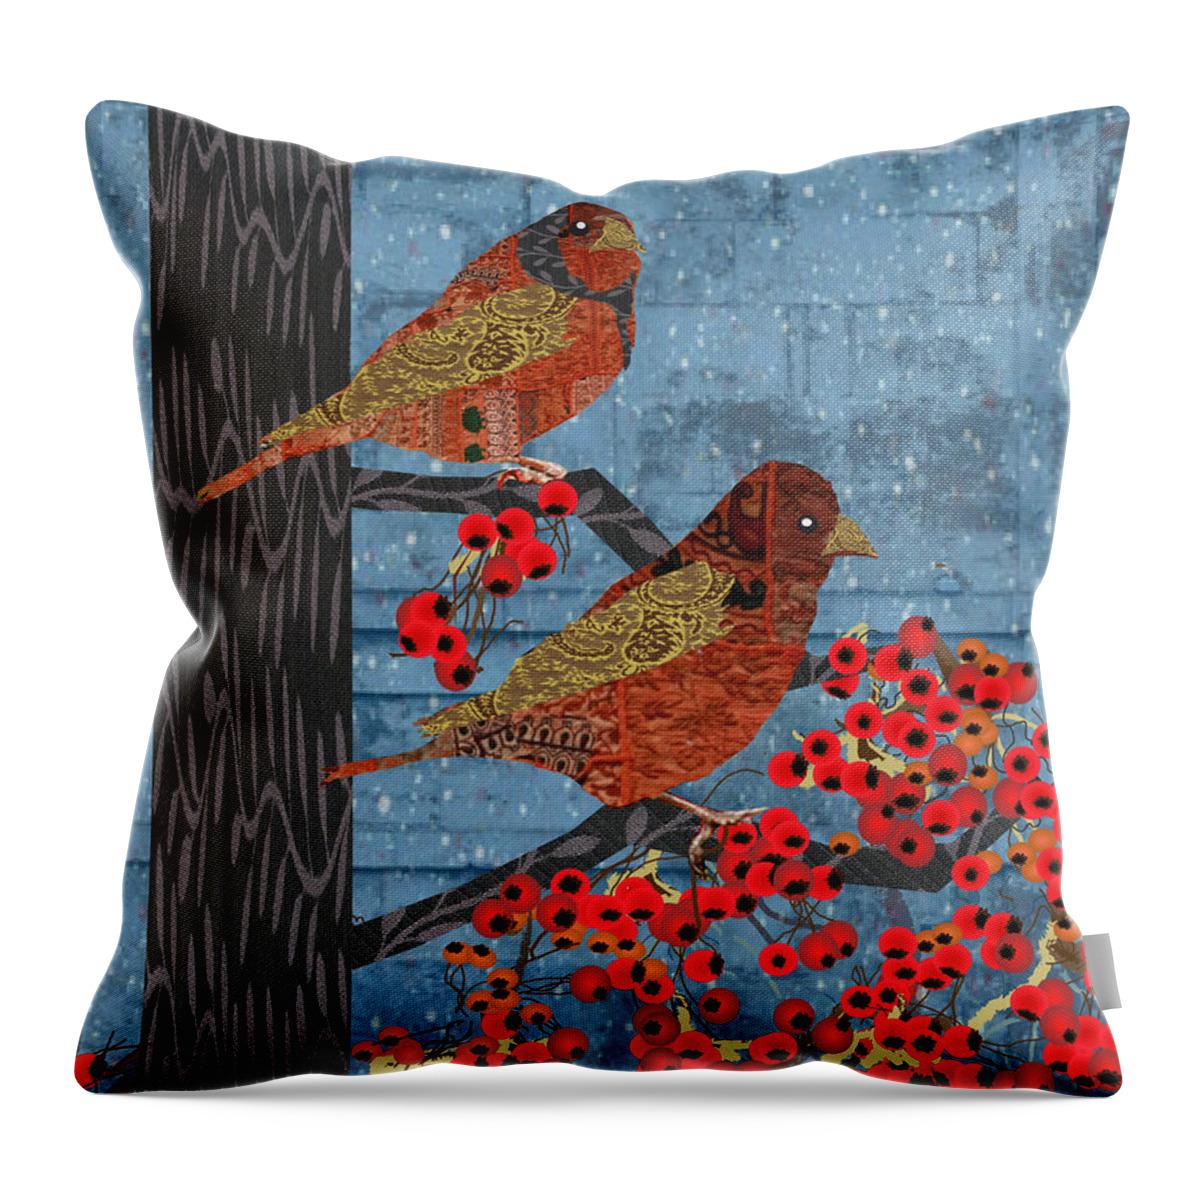 Fabric Birds Throw Pillow featuring the digital art Sage Brush Sparrow in Rain by Kim Prowse